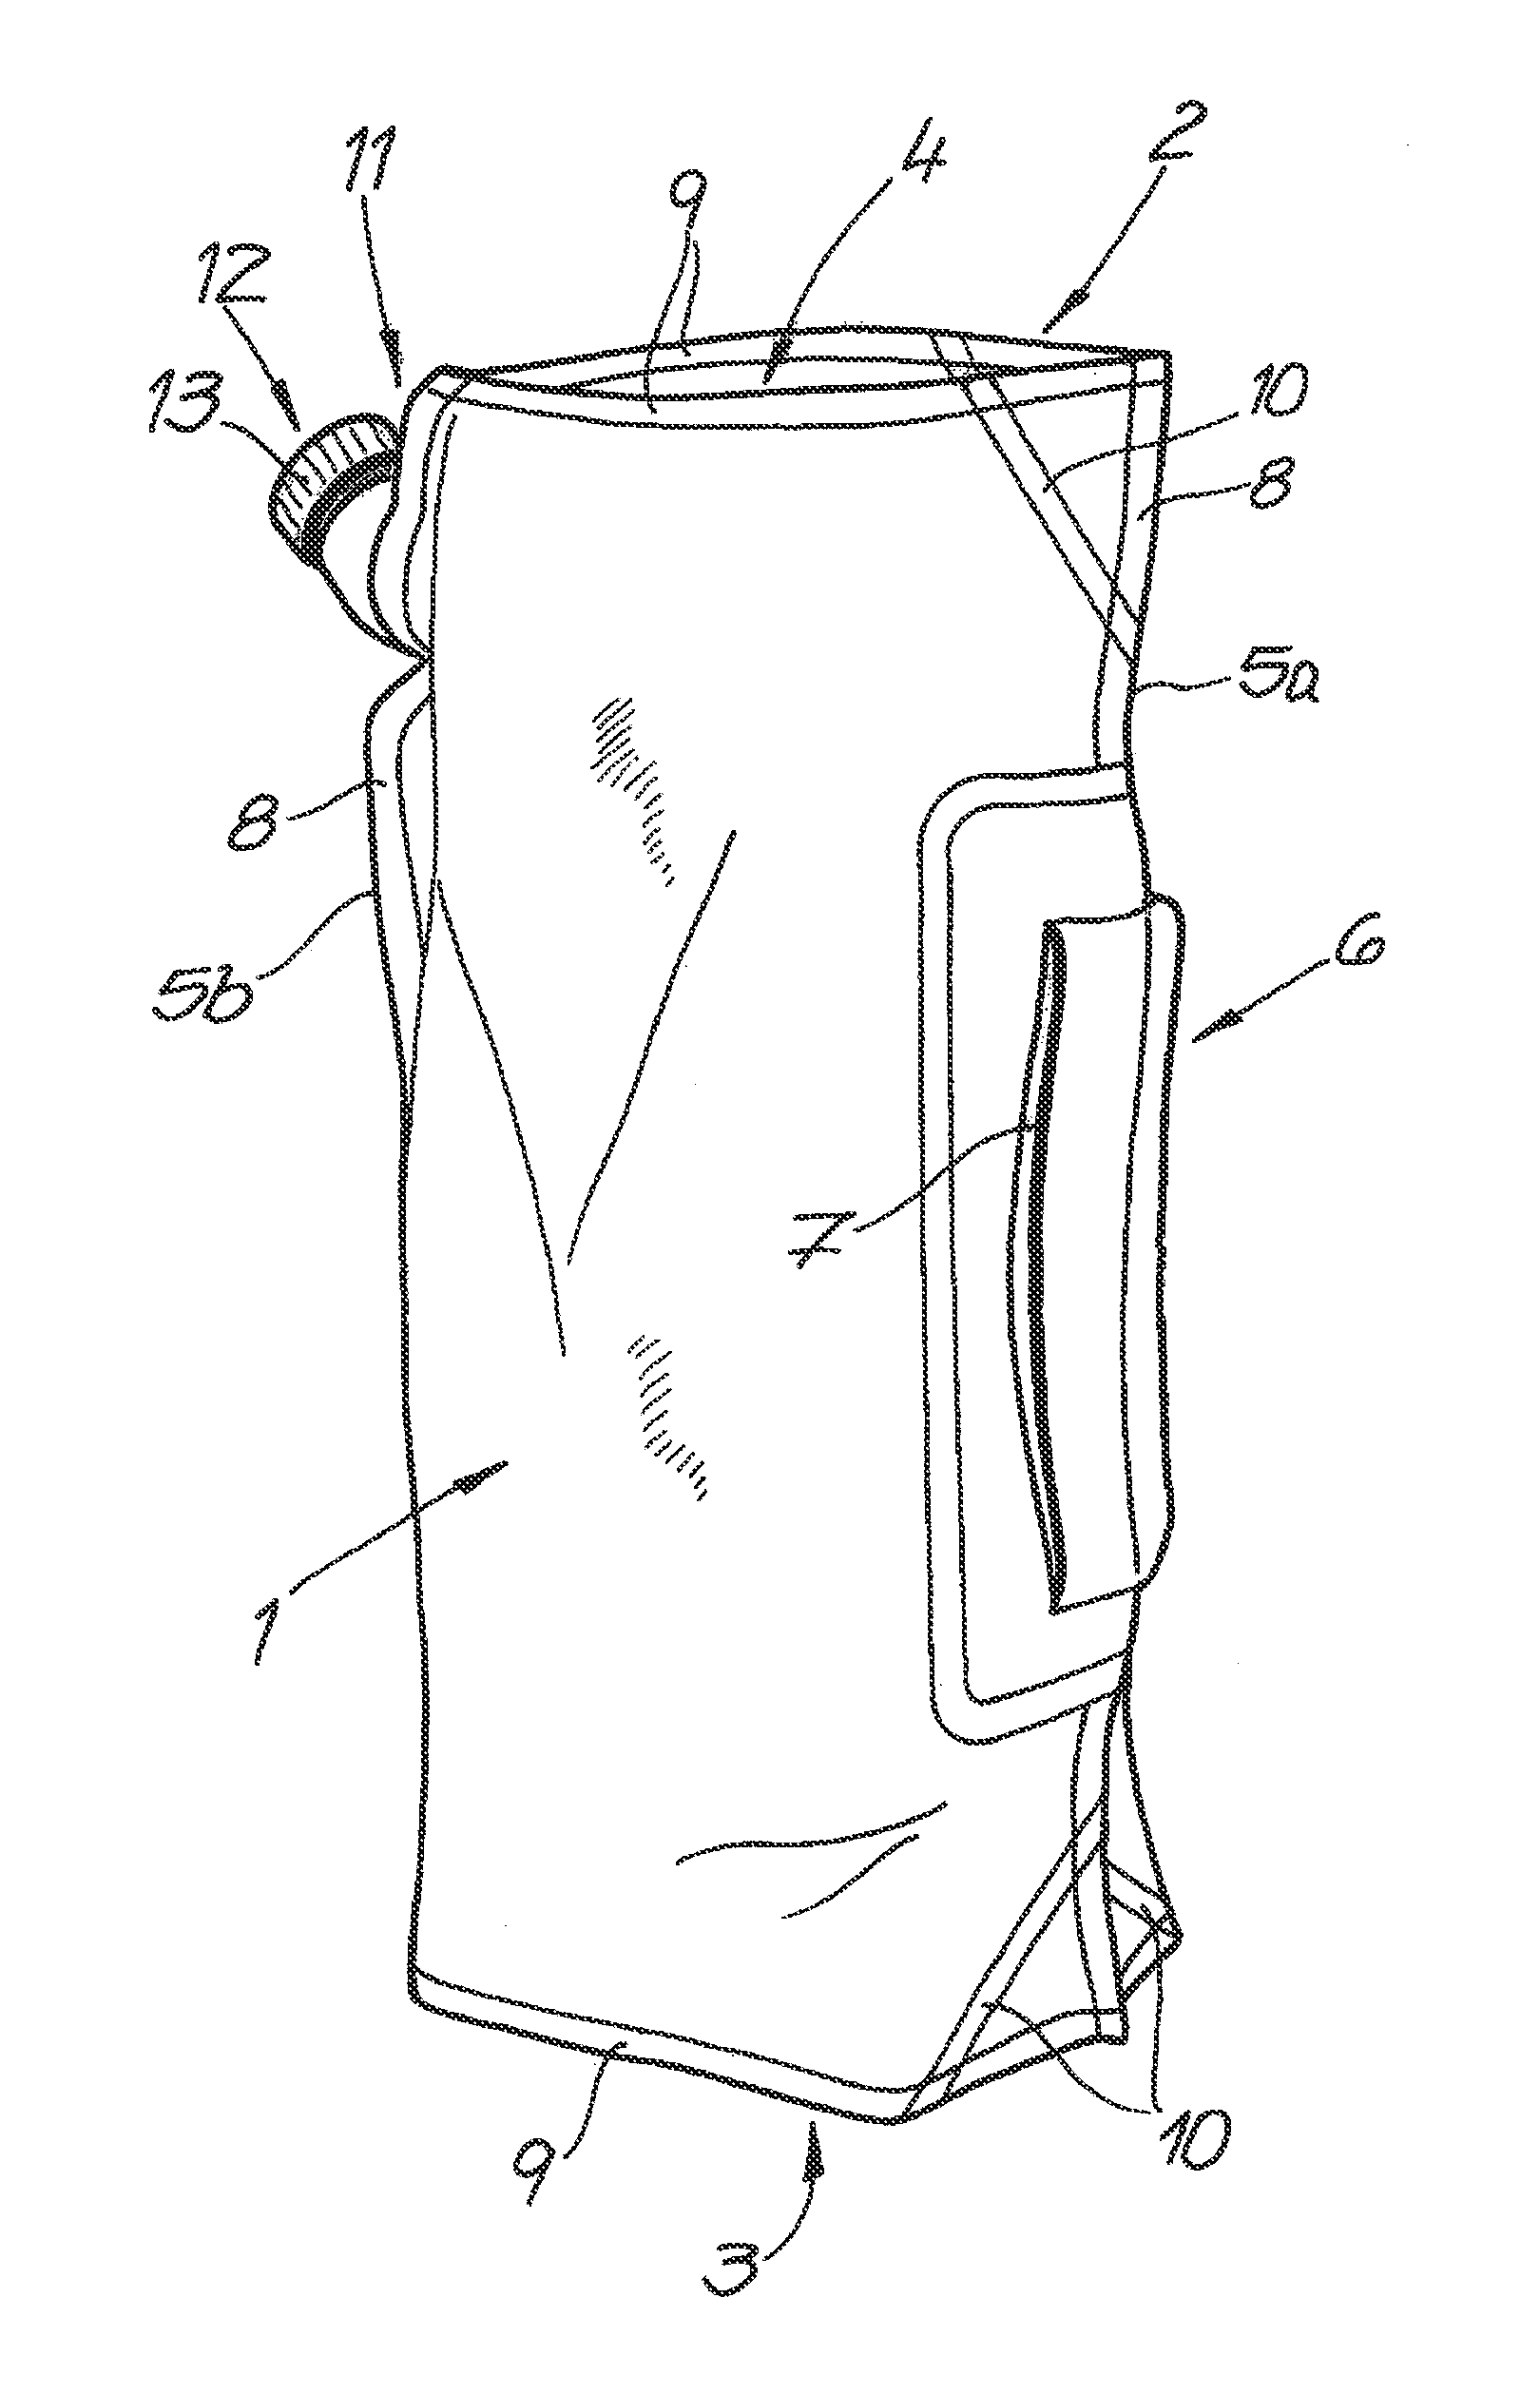 Stand-up bag for pourable goods and method for manufacturing the stand-up bag